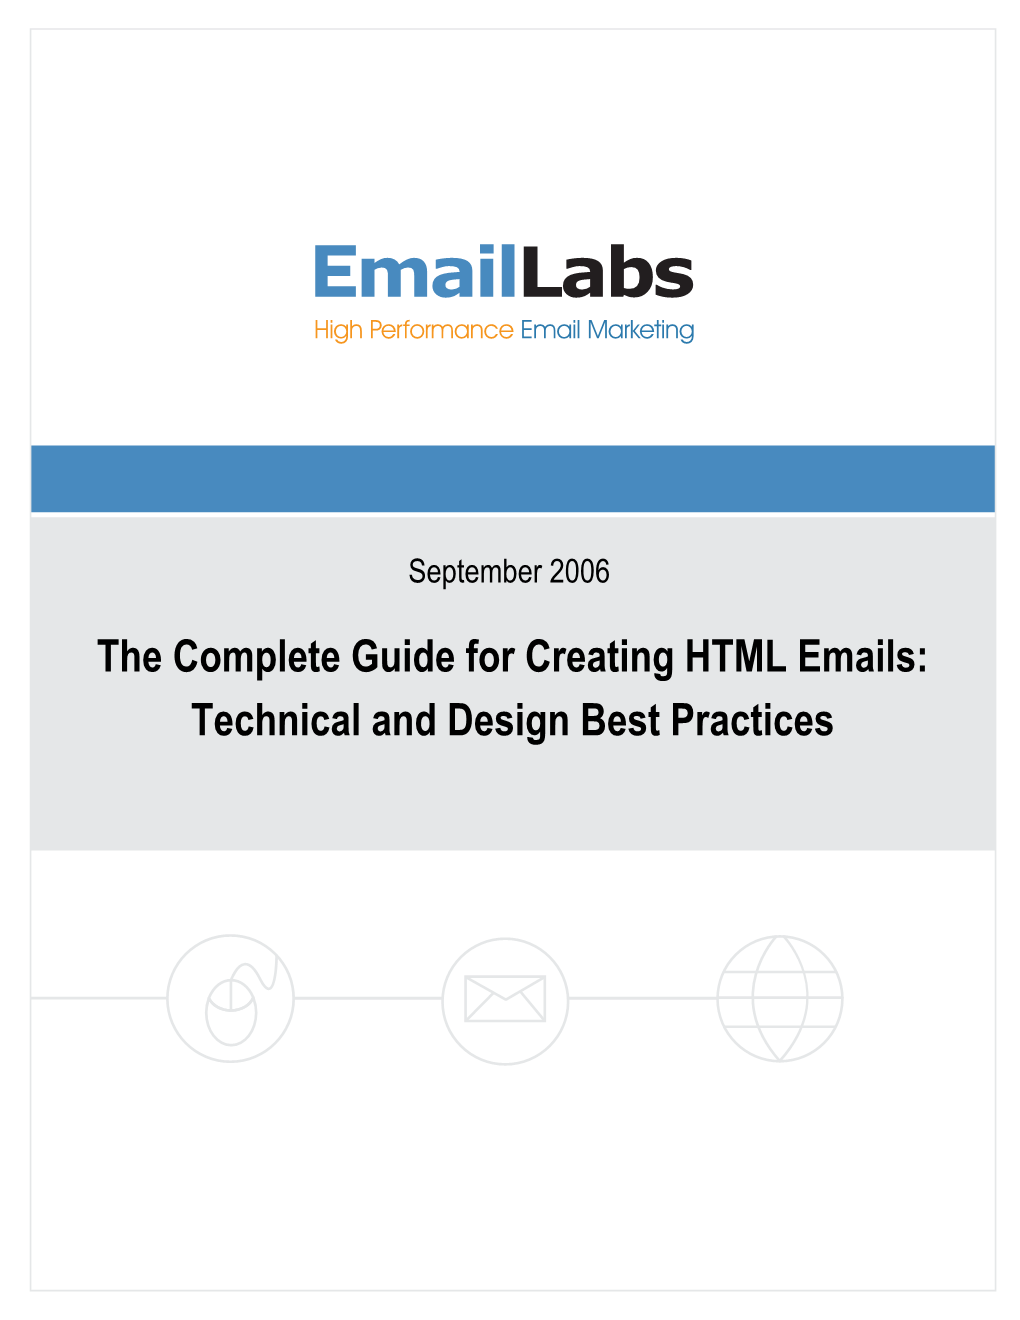 Emaillabs Complete Guide for Creating HTML Emails